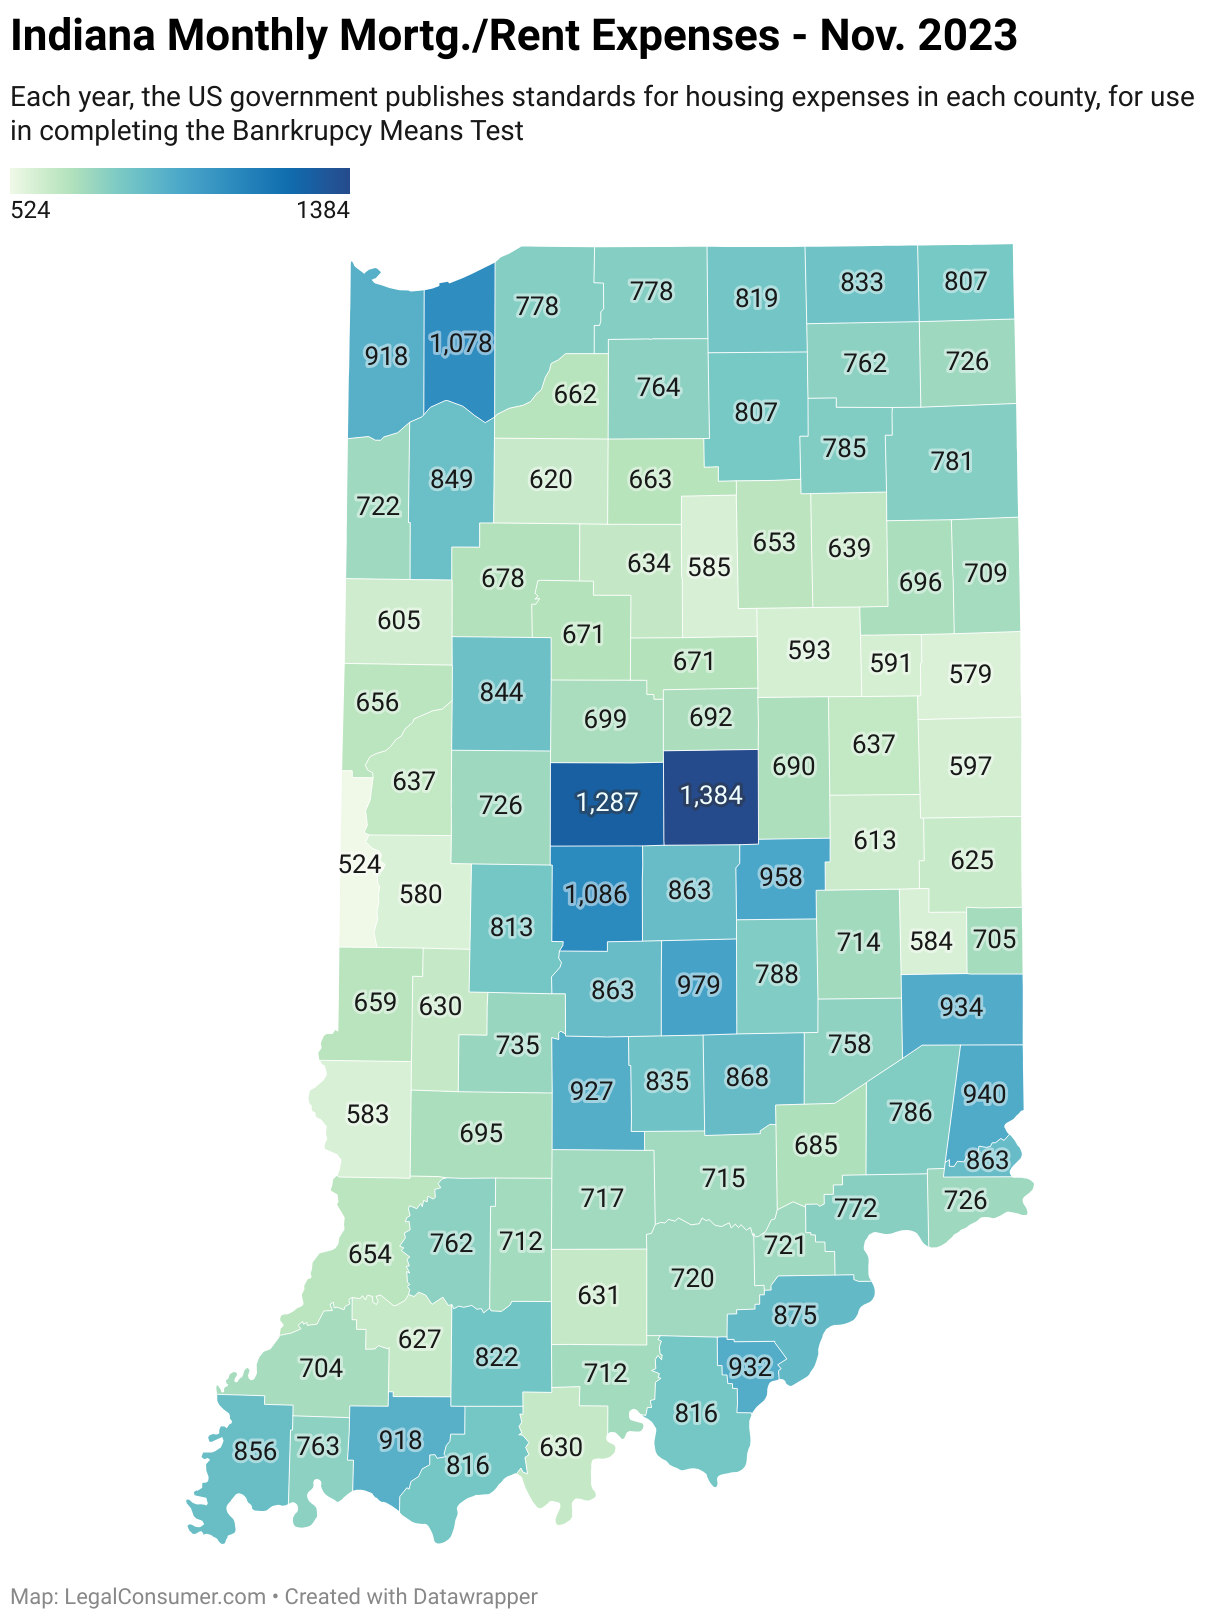 Map of Indiana Housing Expenses for Bankruptcy Means Test